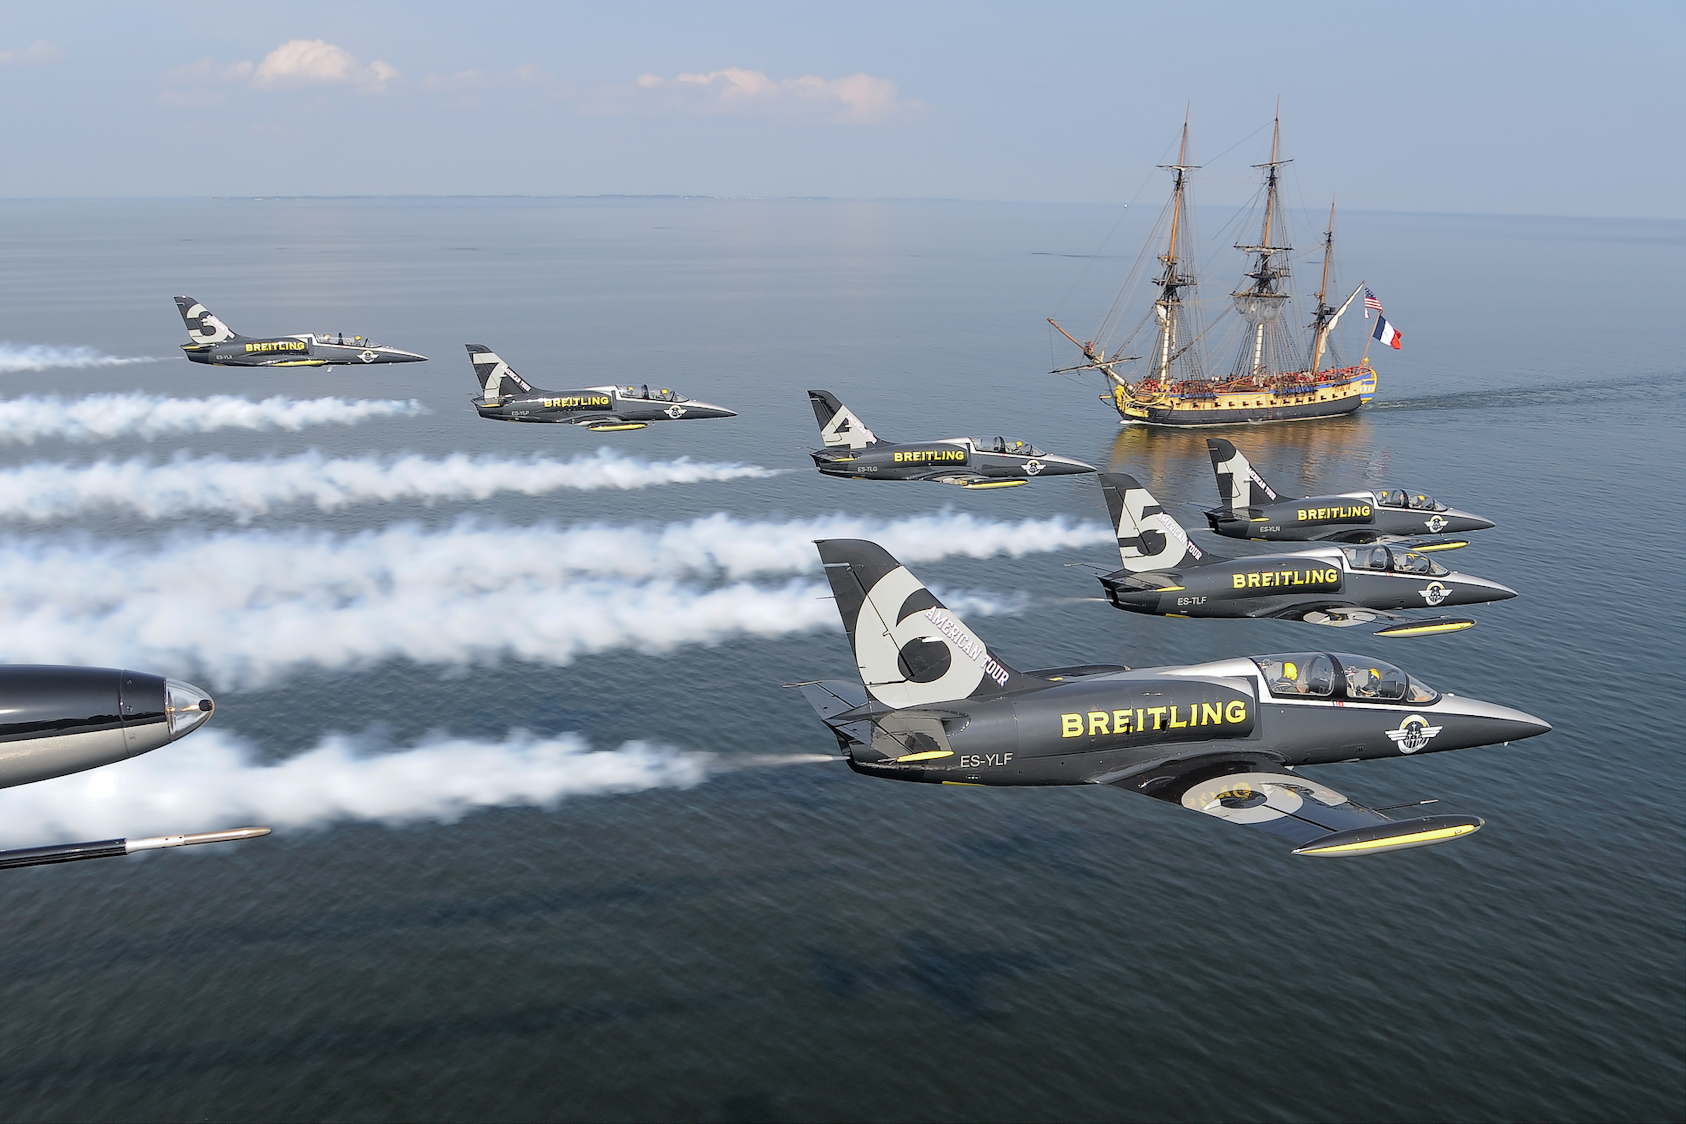 Breitling Jet Team Flies Over Replica of Famed French Ship Hermione